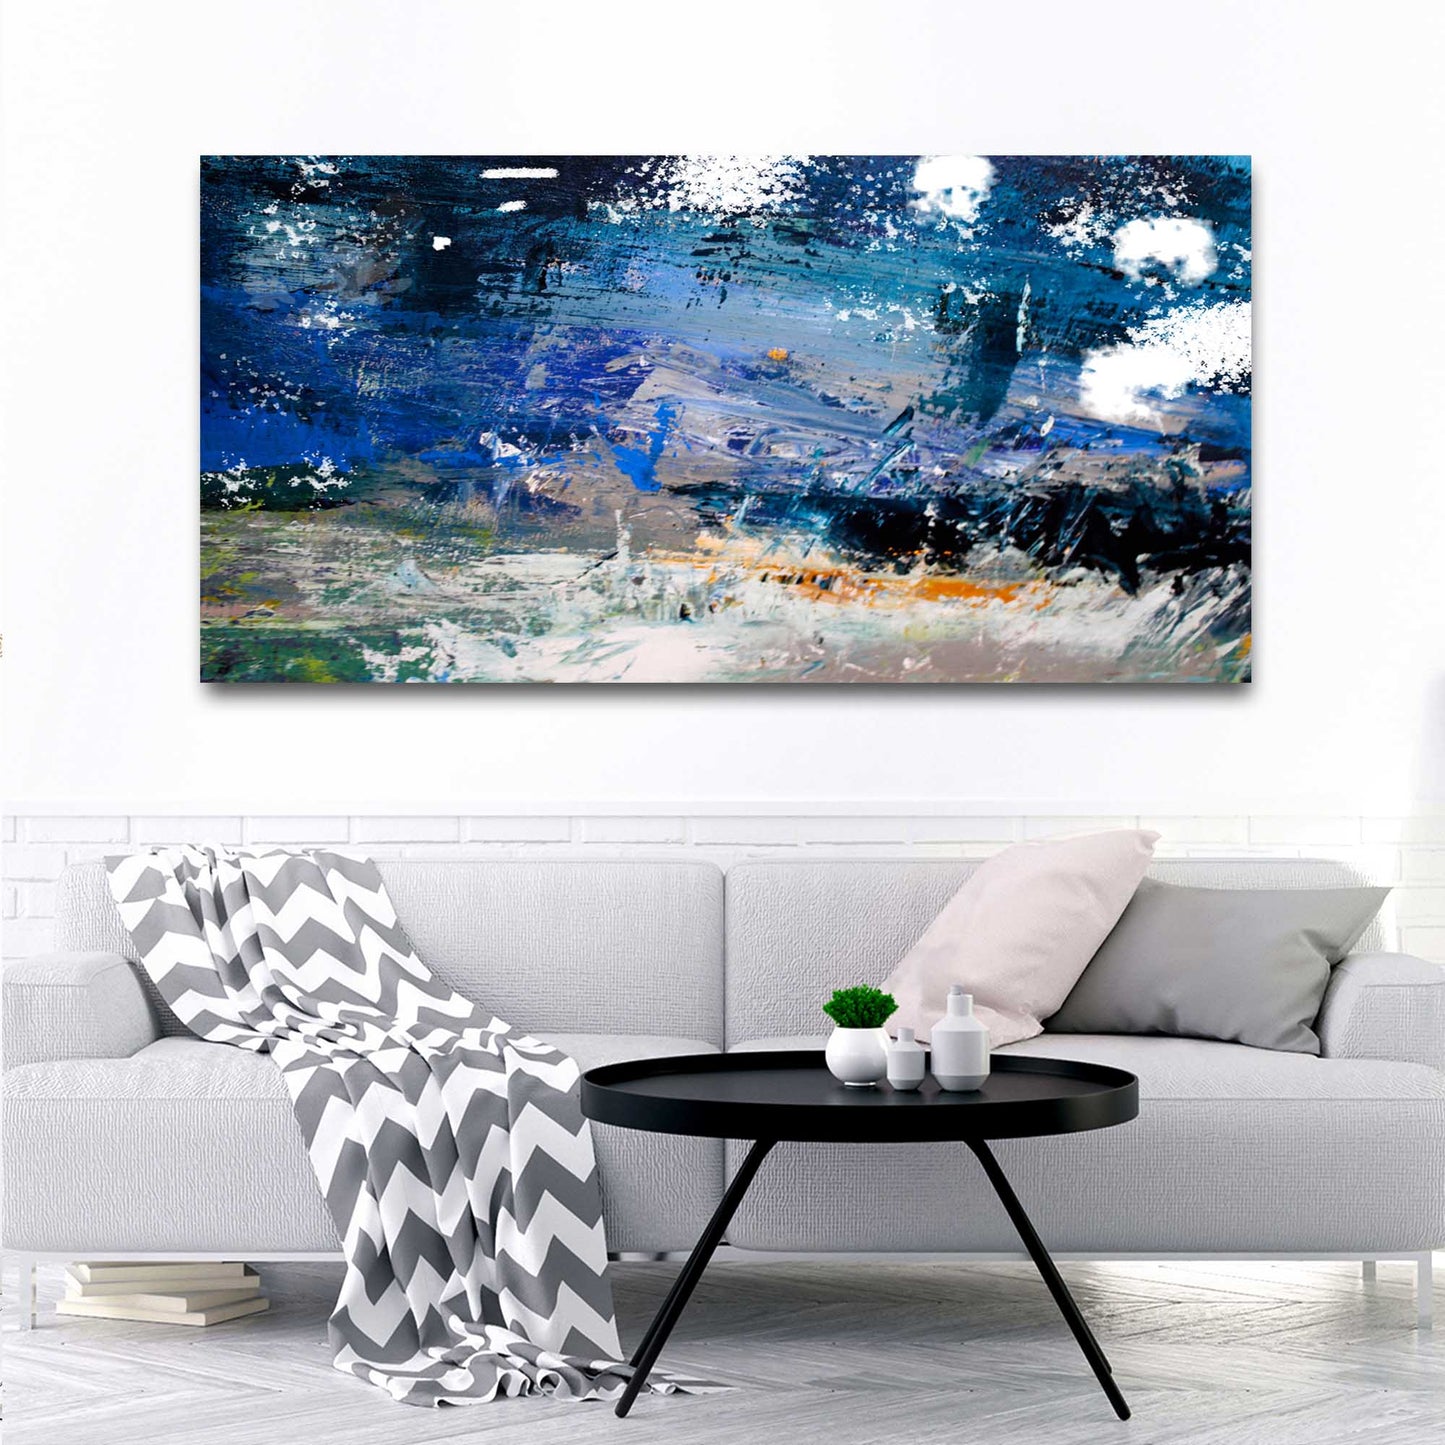 Blue Abstract Canvas Wall Art - Image by Tailored Canvases